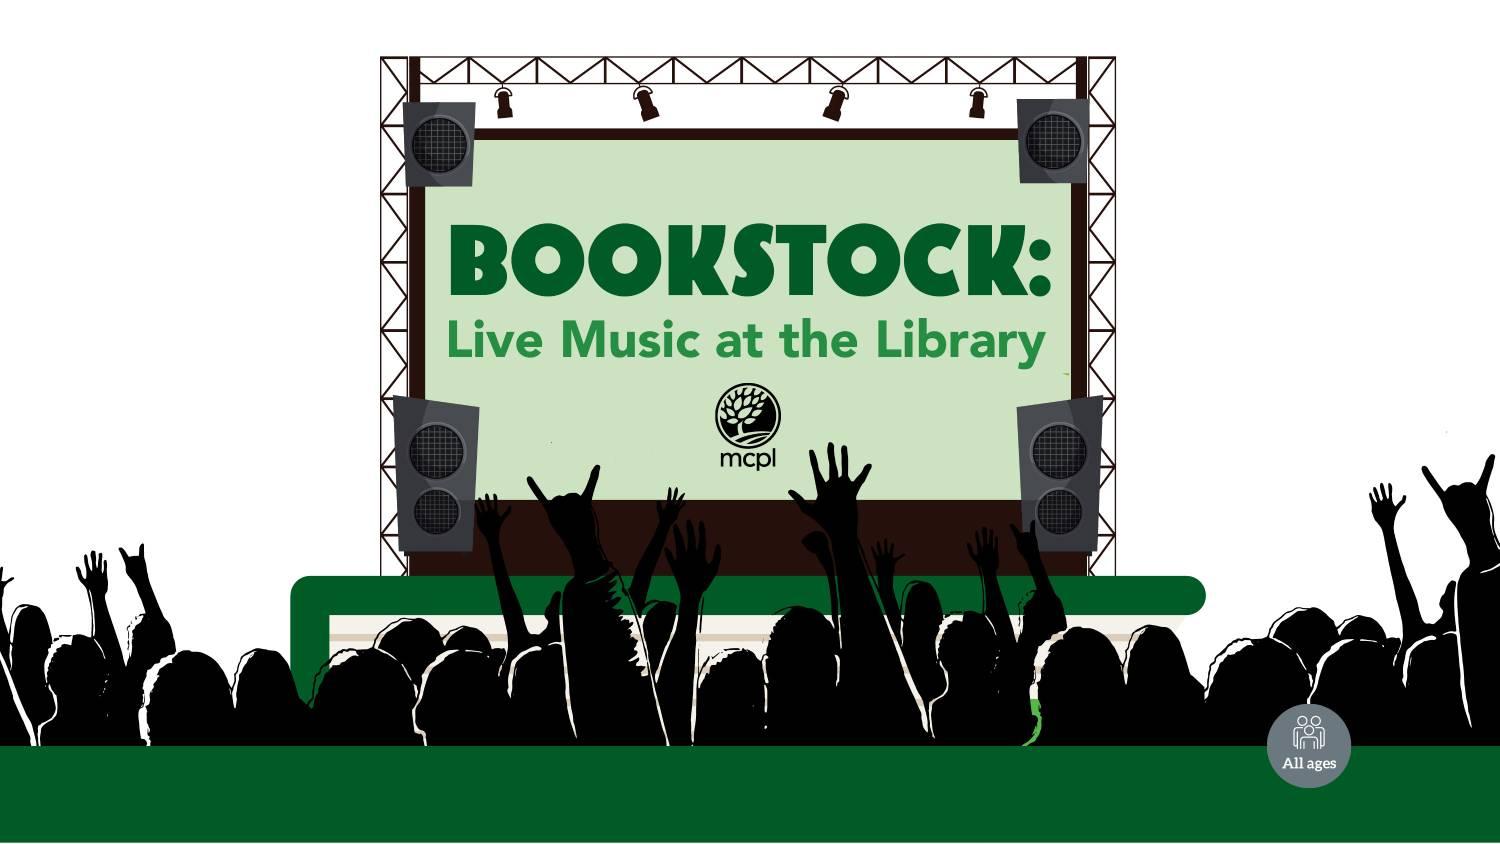 Bookstock: Live Music at the Library